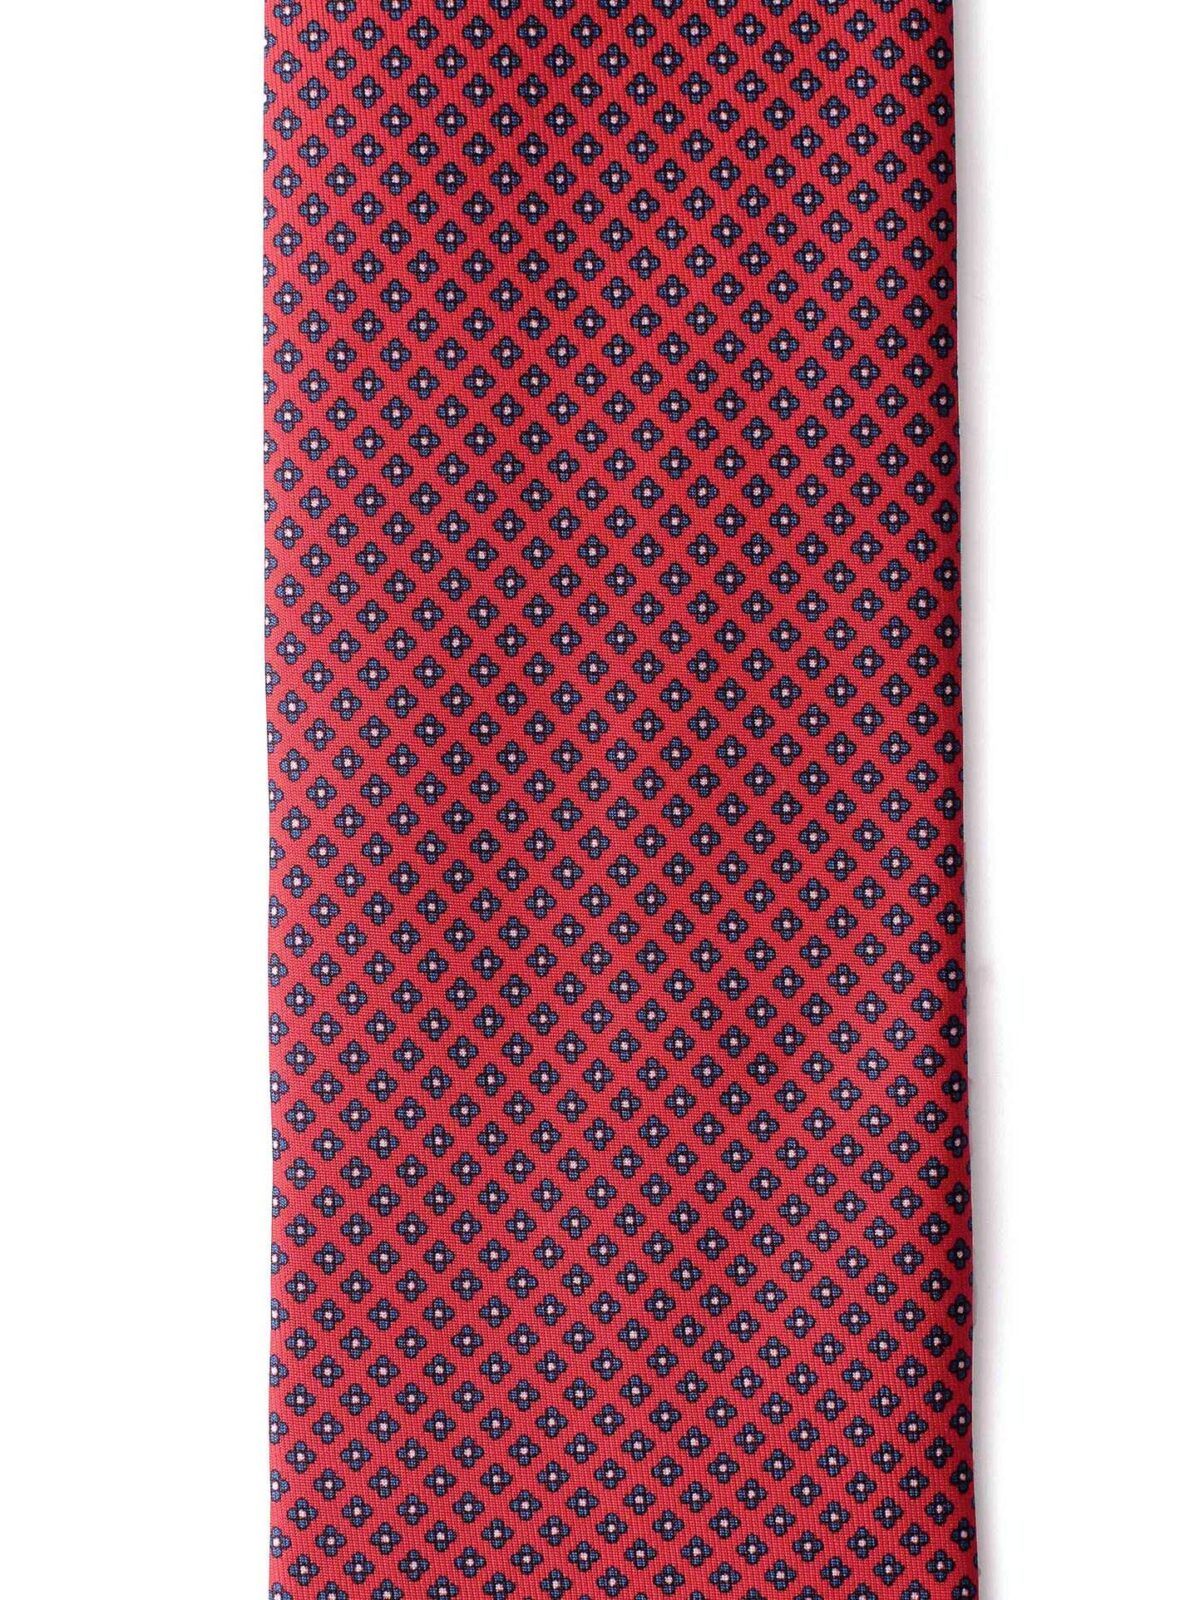 Red and Navy Small Foulard Silk Tie